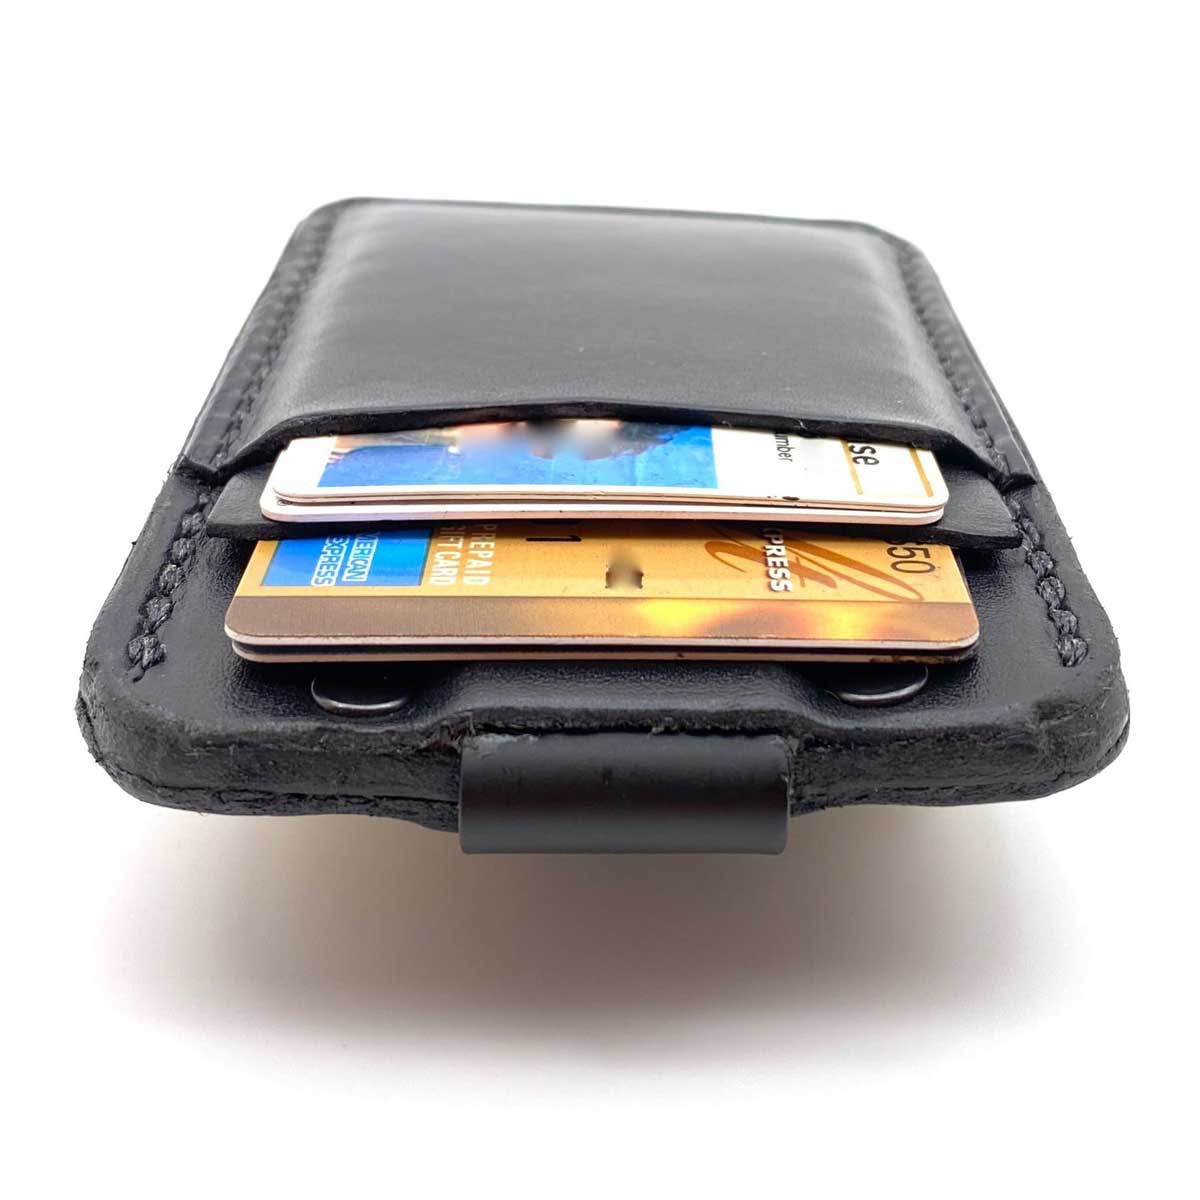 Top side of Black Bridle leather minimalist wallet with credit cards in pockets